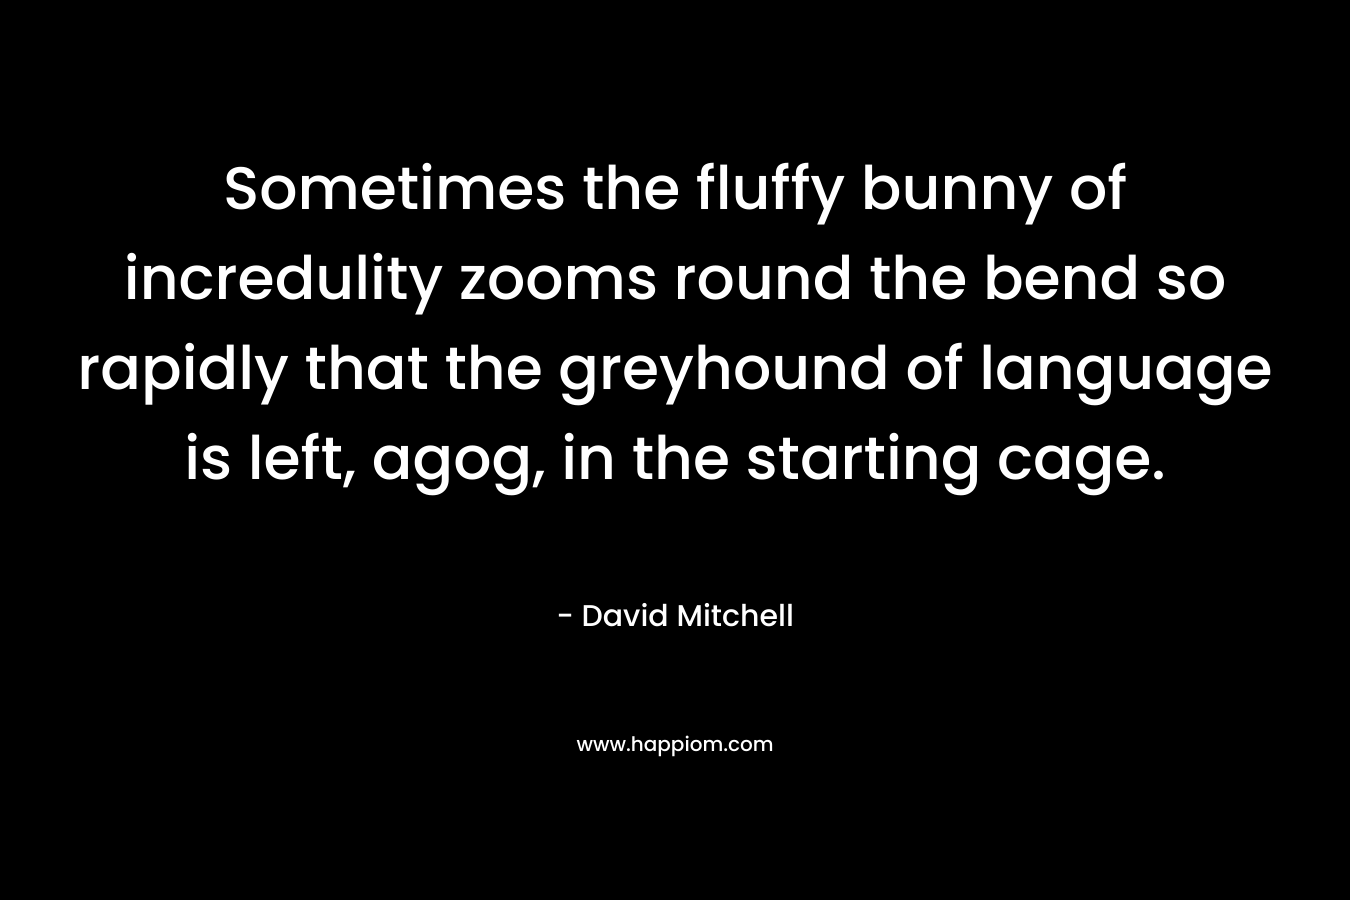 Sometimes the fluffy bunny of incredulity zooms round the bend so rapidly that the greyhound of language is left, agog, in the starting cage. – David Mitchell